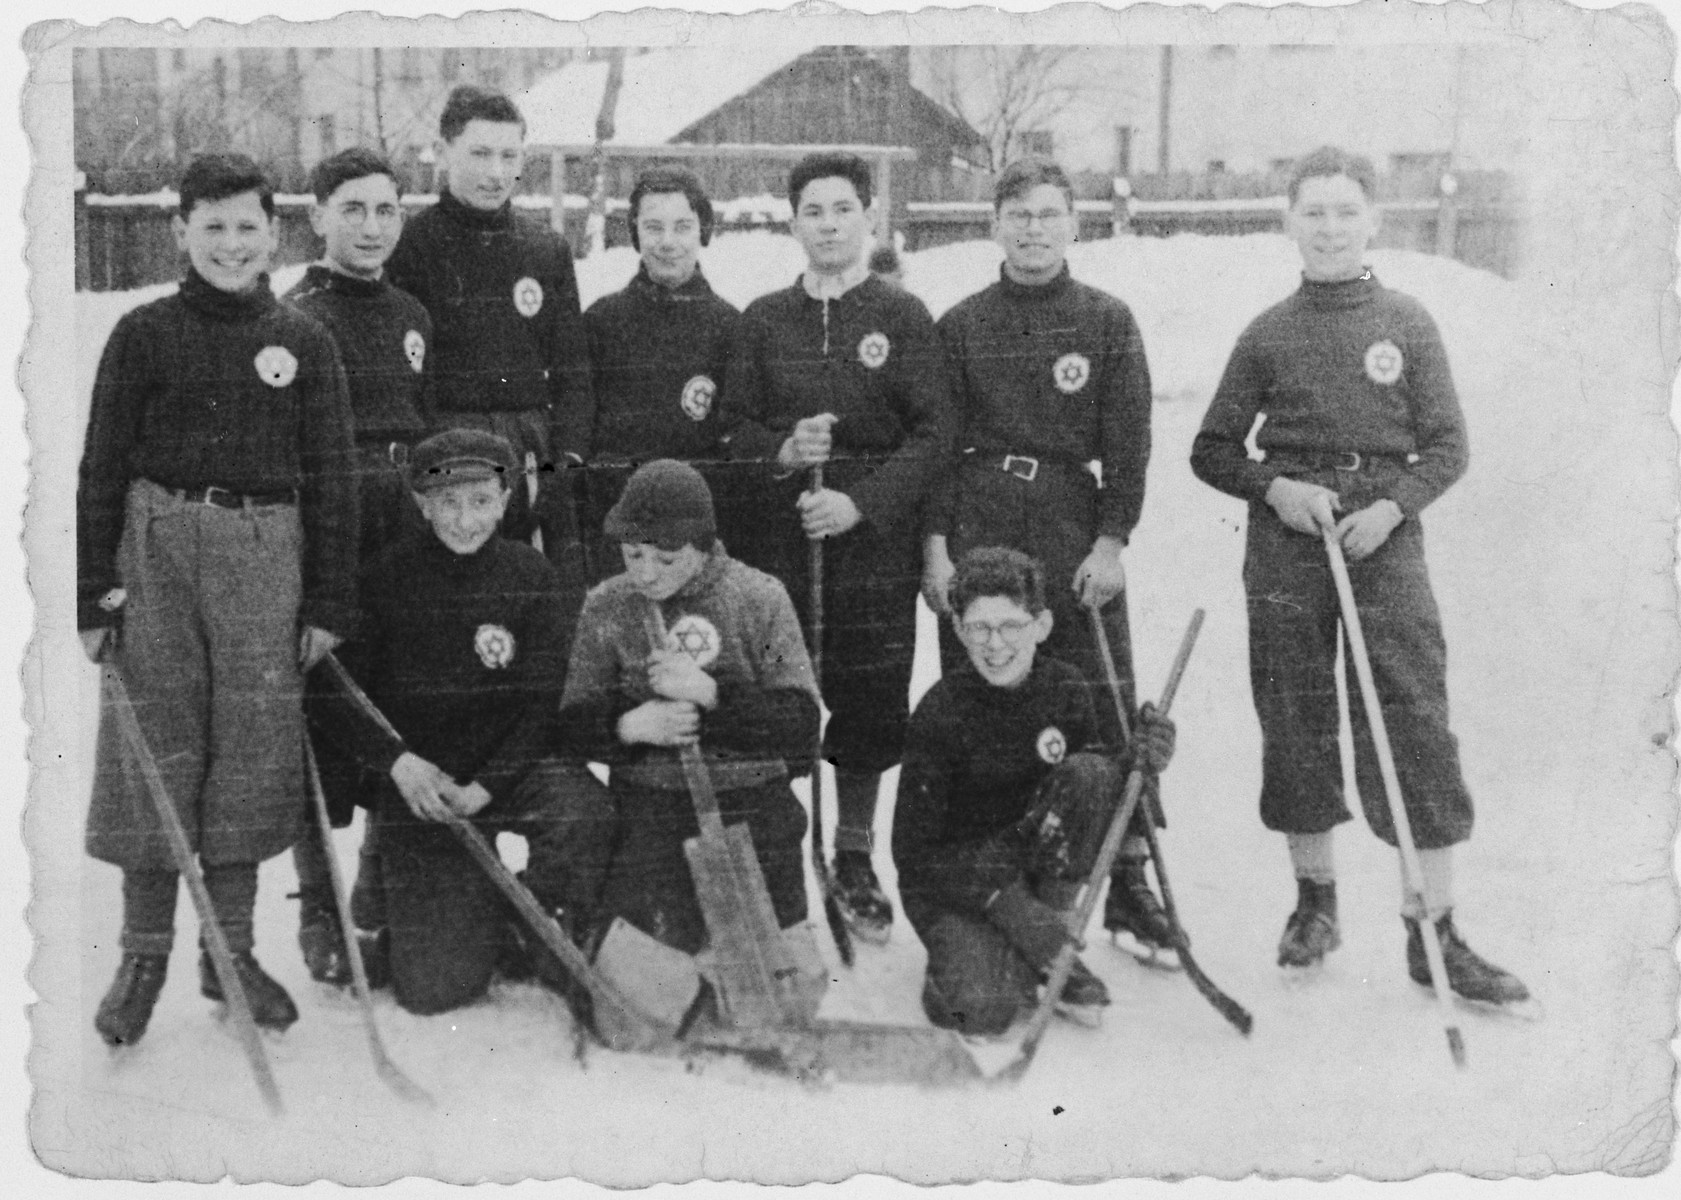 Members of a Jewish ice hockey team wearing stars of David on their shirts pose in the snow.